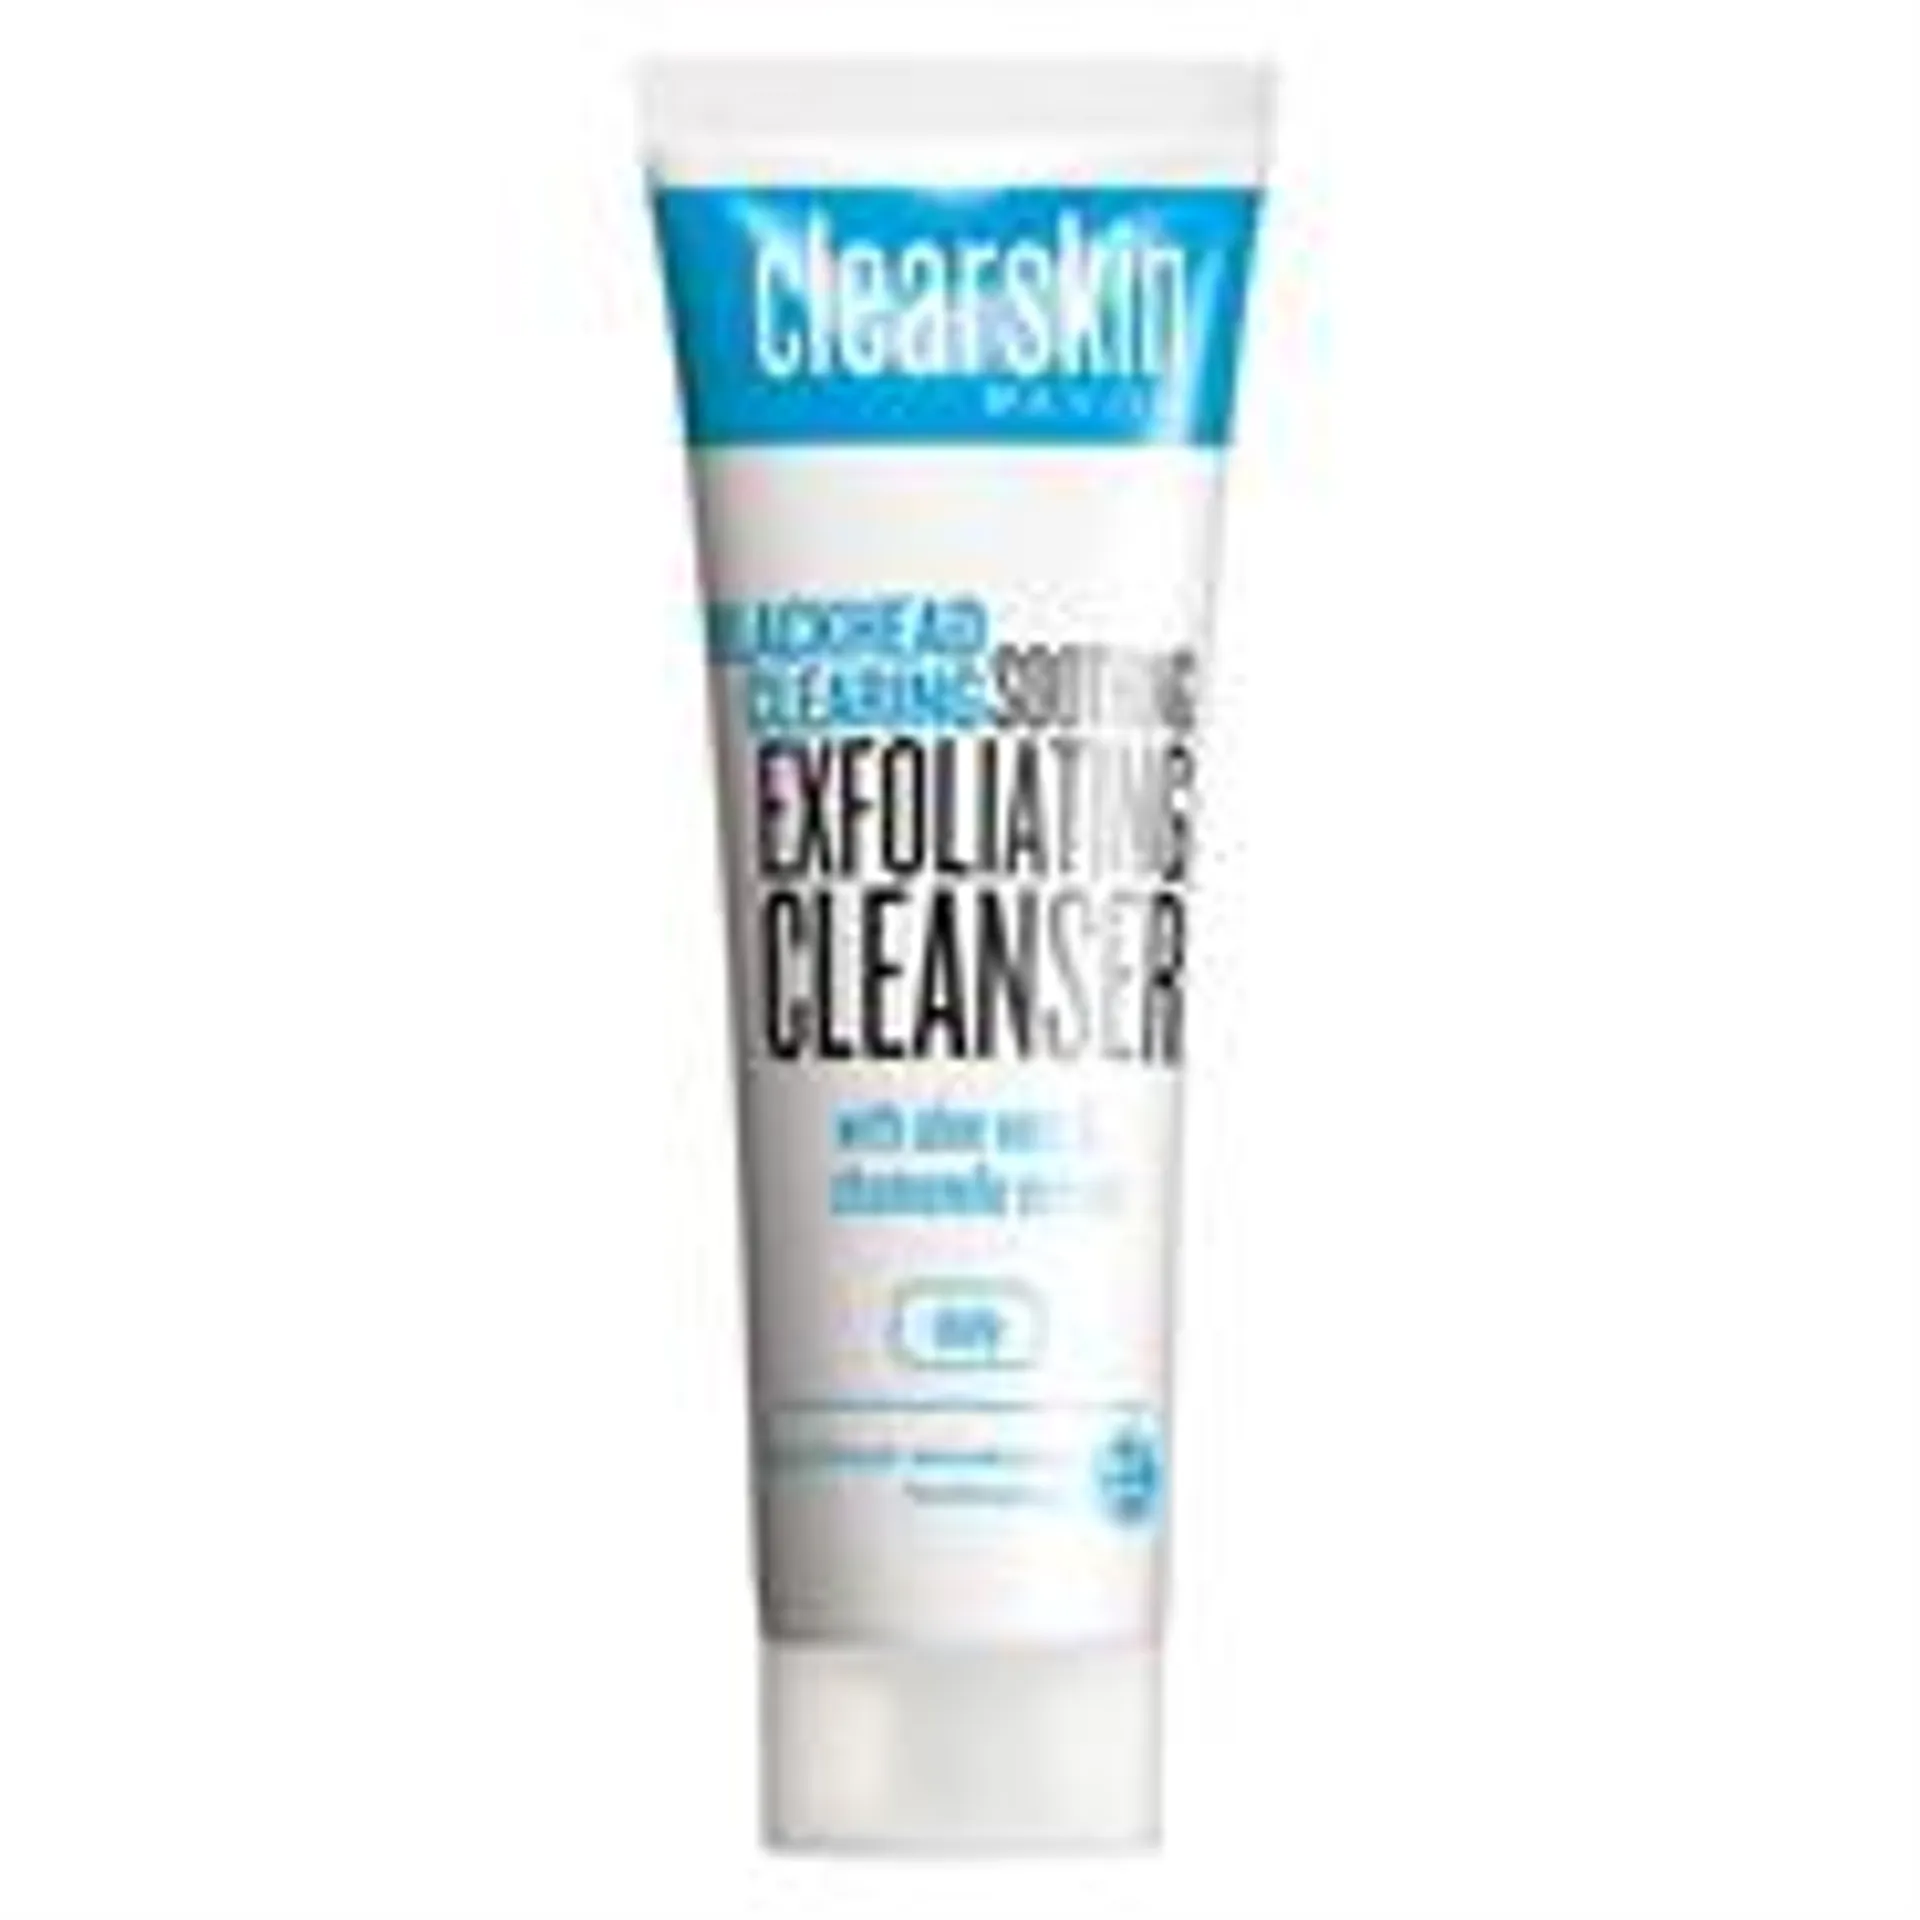 Productos ClearSkin